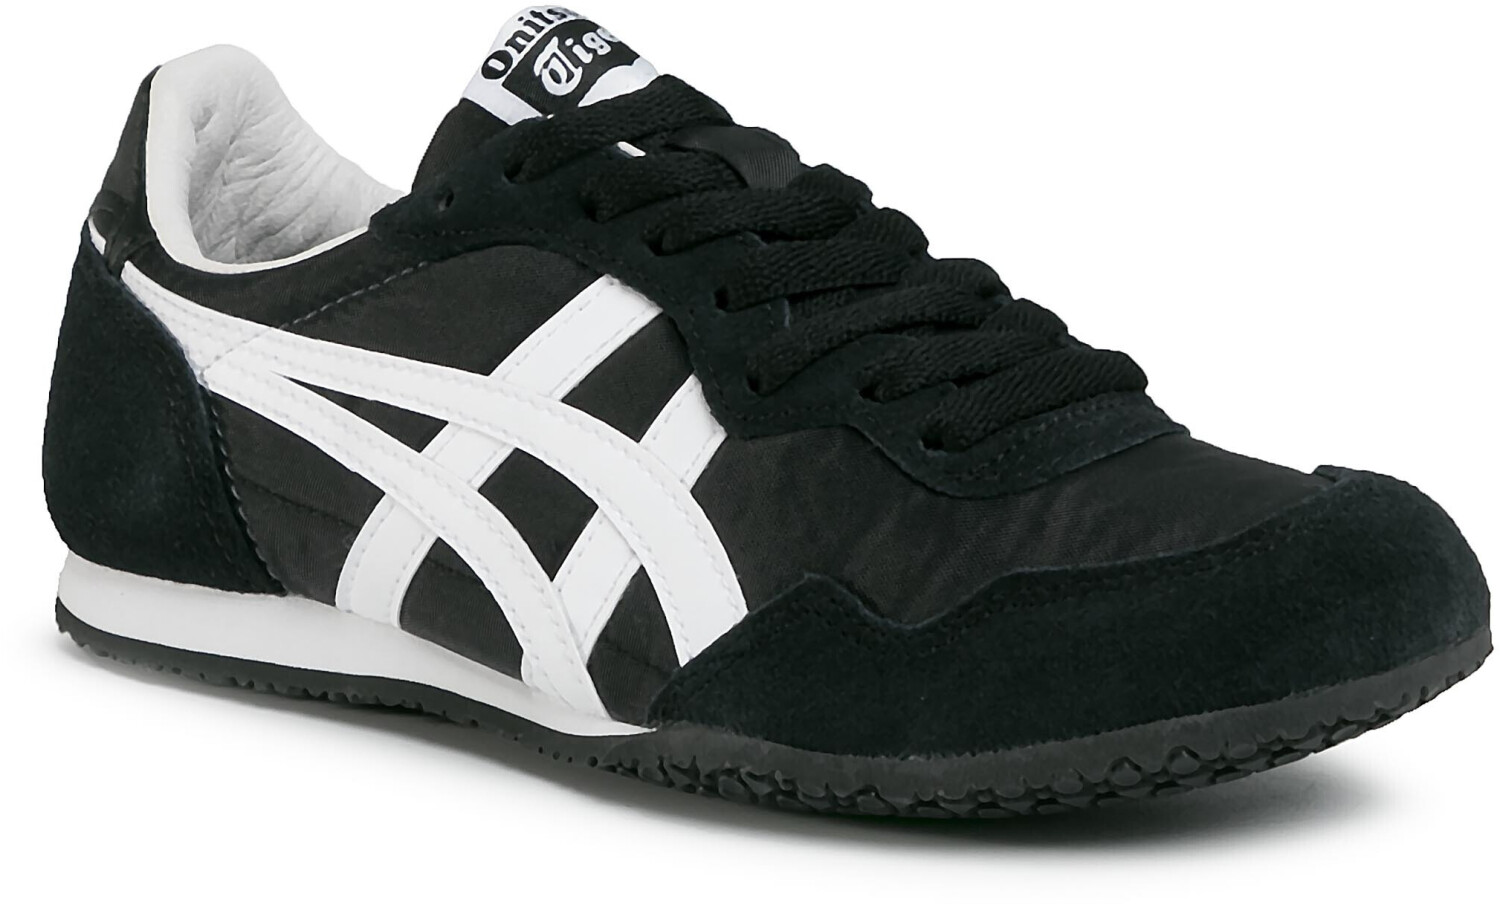 Buy Asics Onitsuka Tiger Corsair black/white from £62.50 (Today) – Best ...